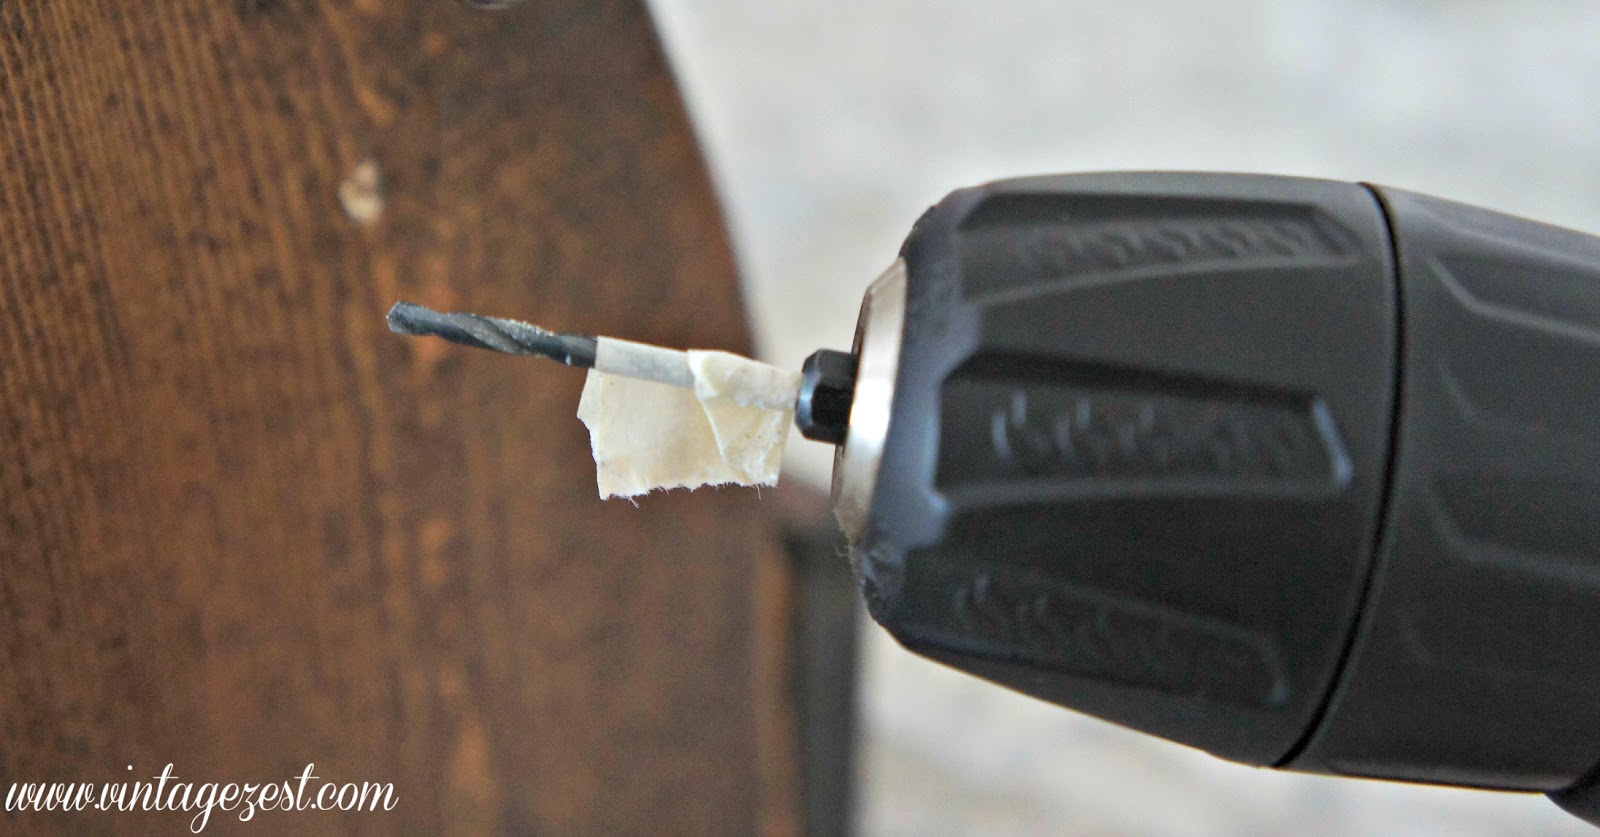 Woodworking Tip: How to Make a Easy Drill Bit Guide! on Diane's Vintage Zest!